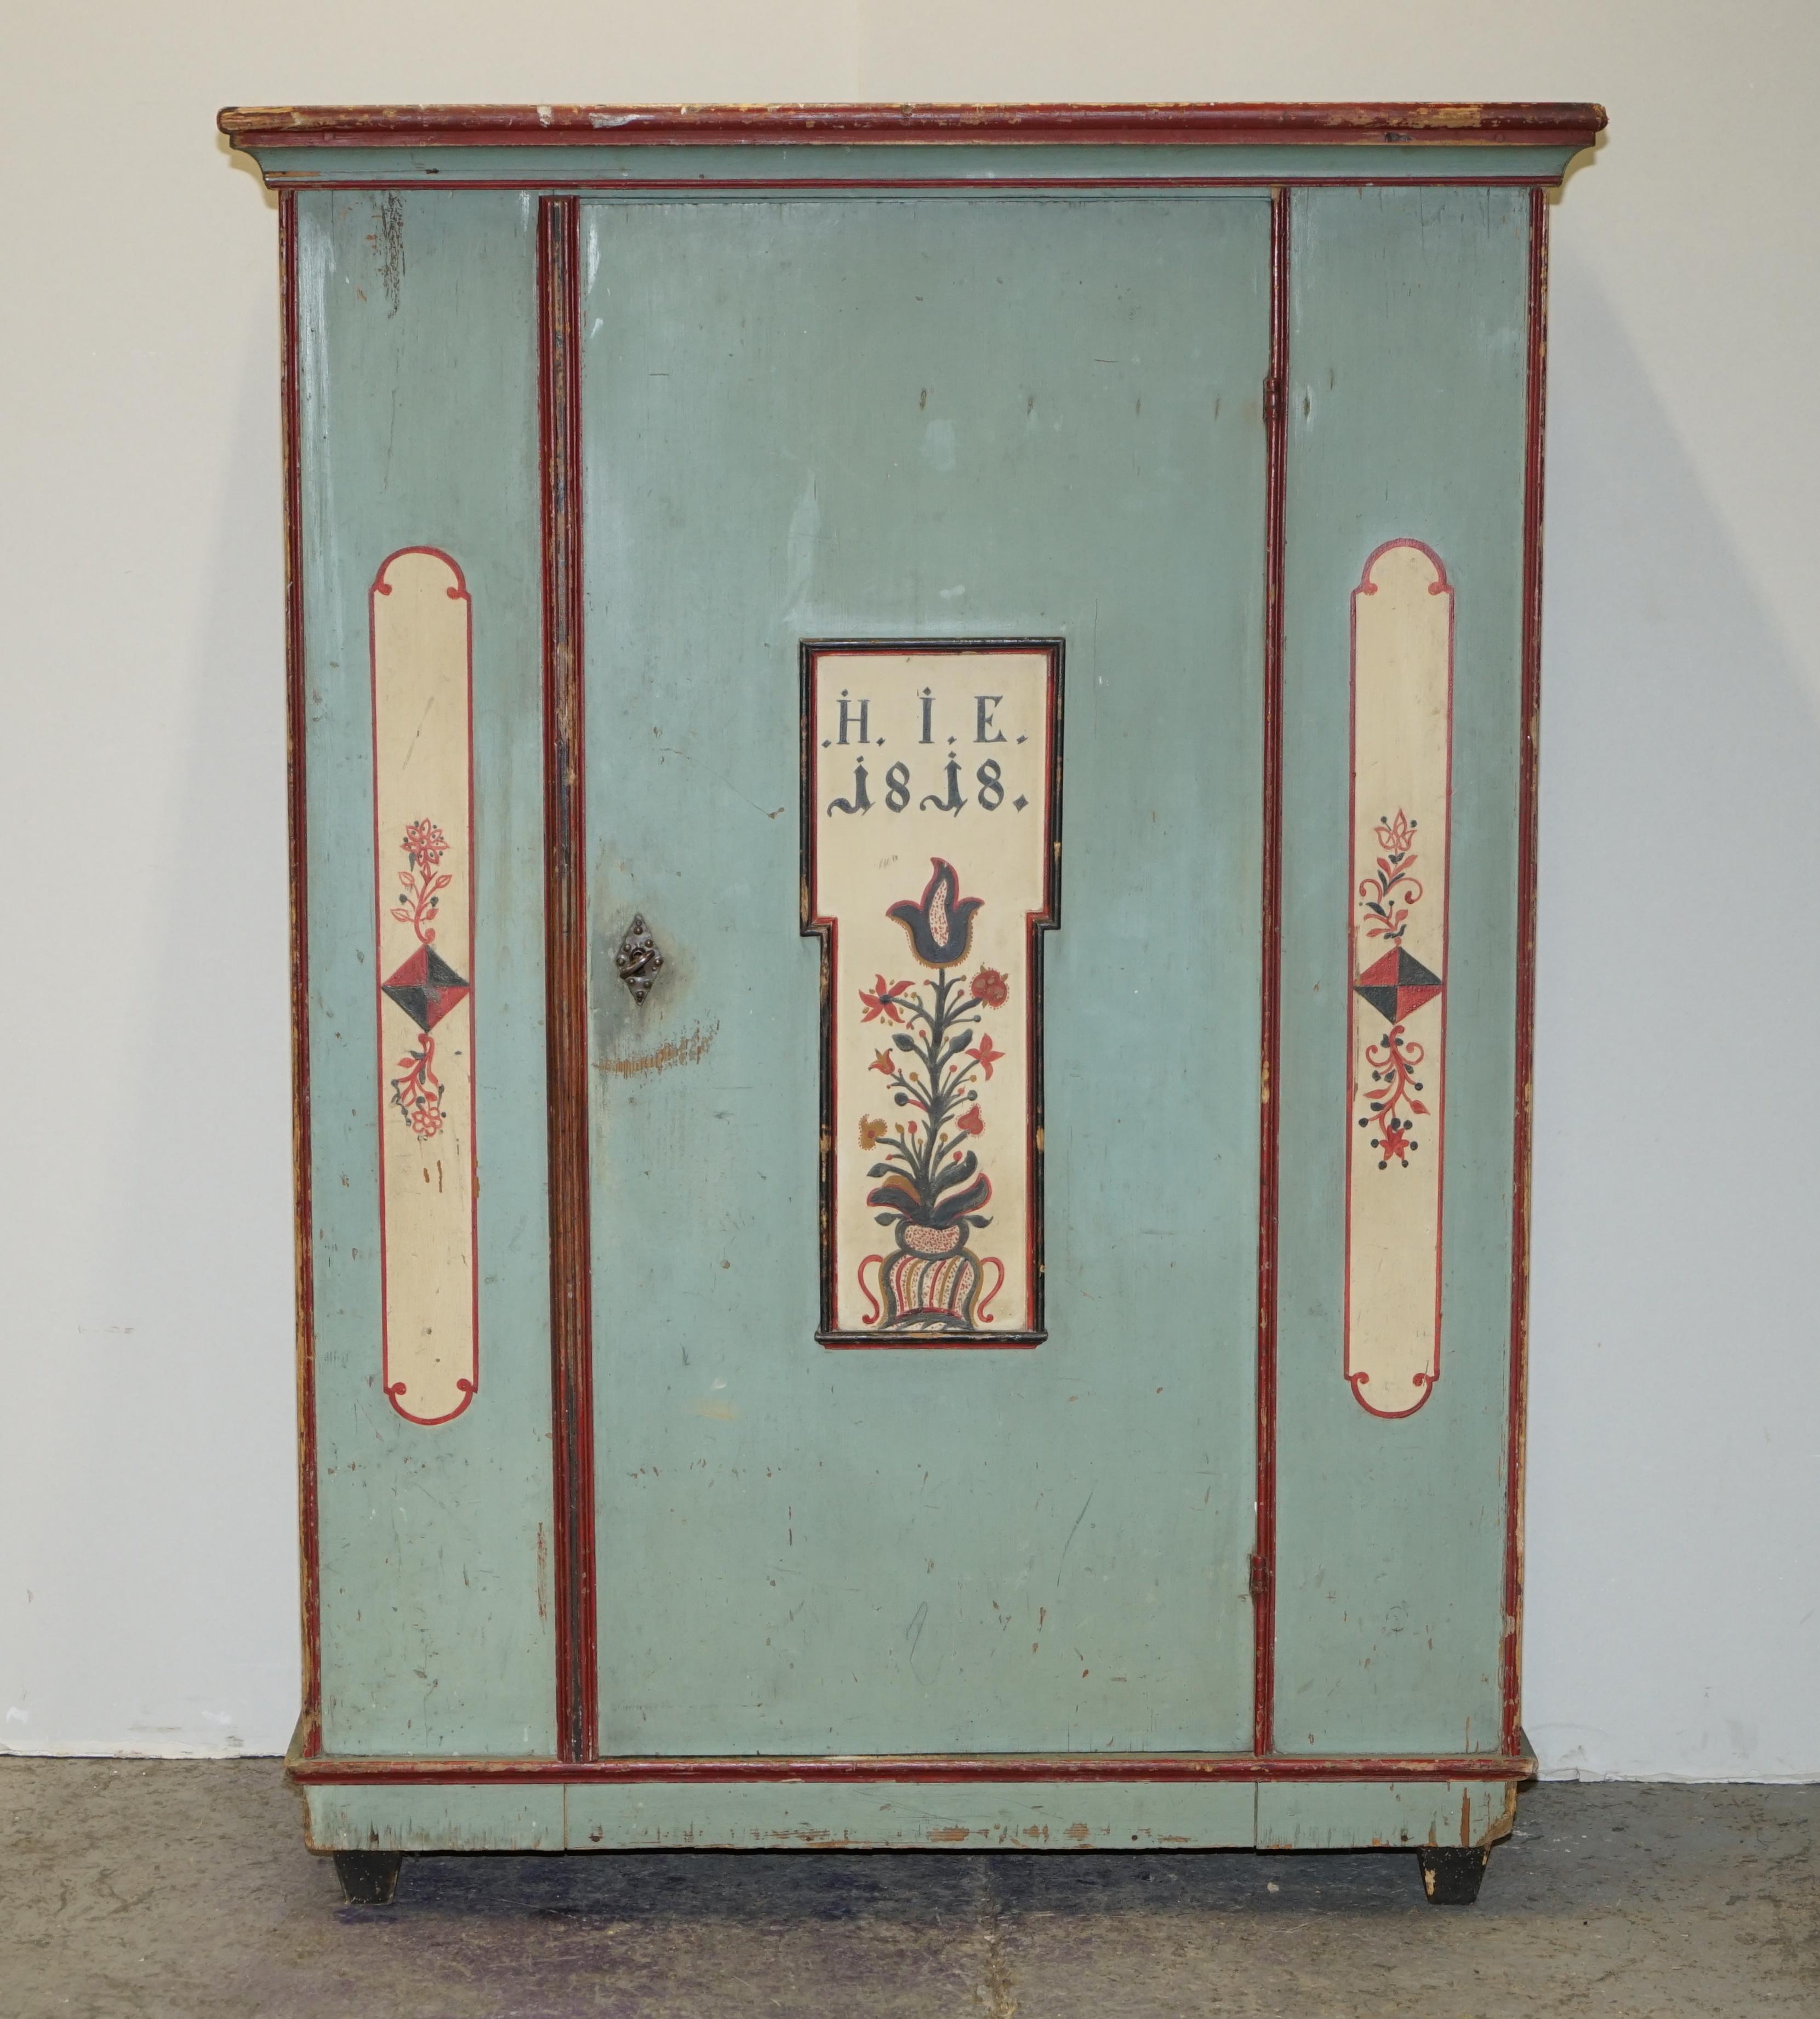 We are is delighted to offer for sale this stunning original 1818 dated Antique German Marriage wardrobe in very a rare light blue paint 

I have recently purchased a very large collection of these original, antique painted wardrobes and trunks, I